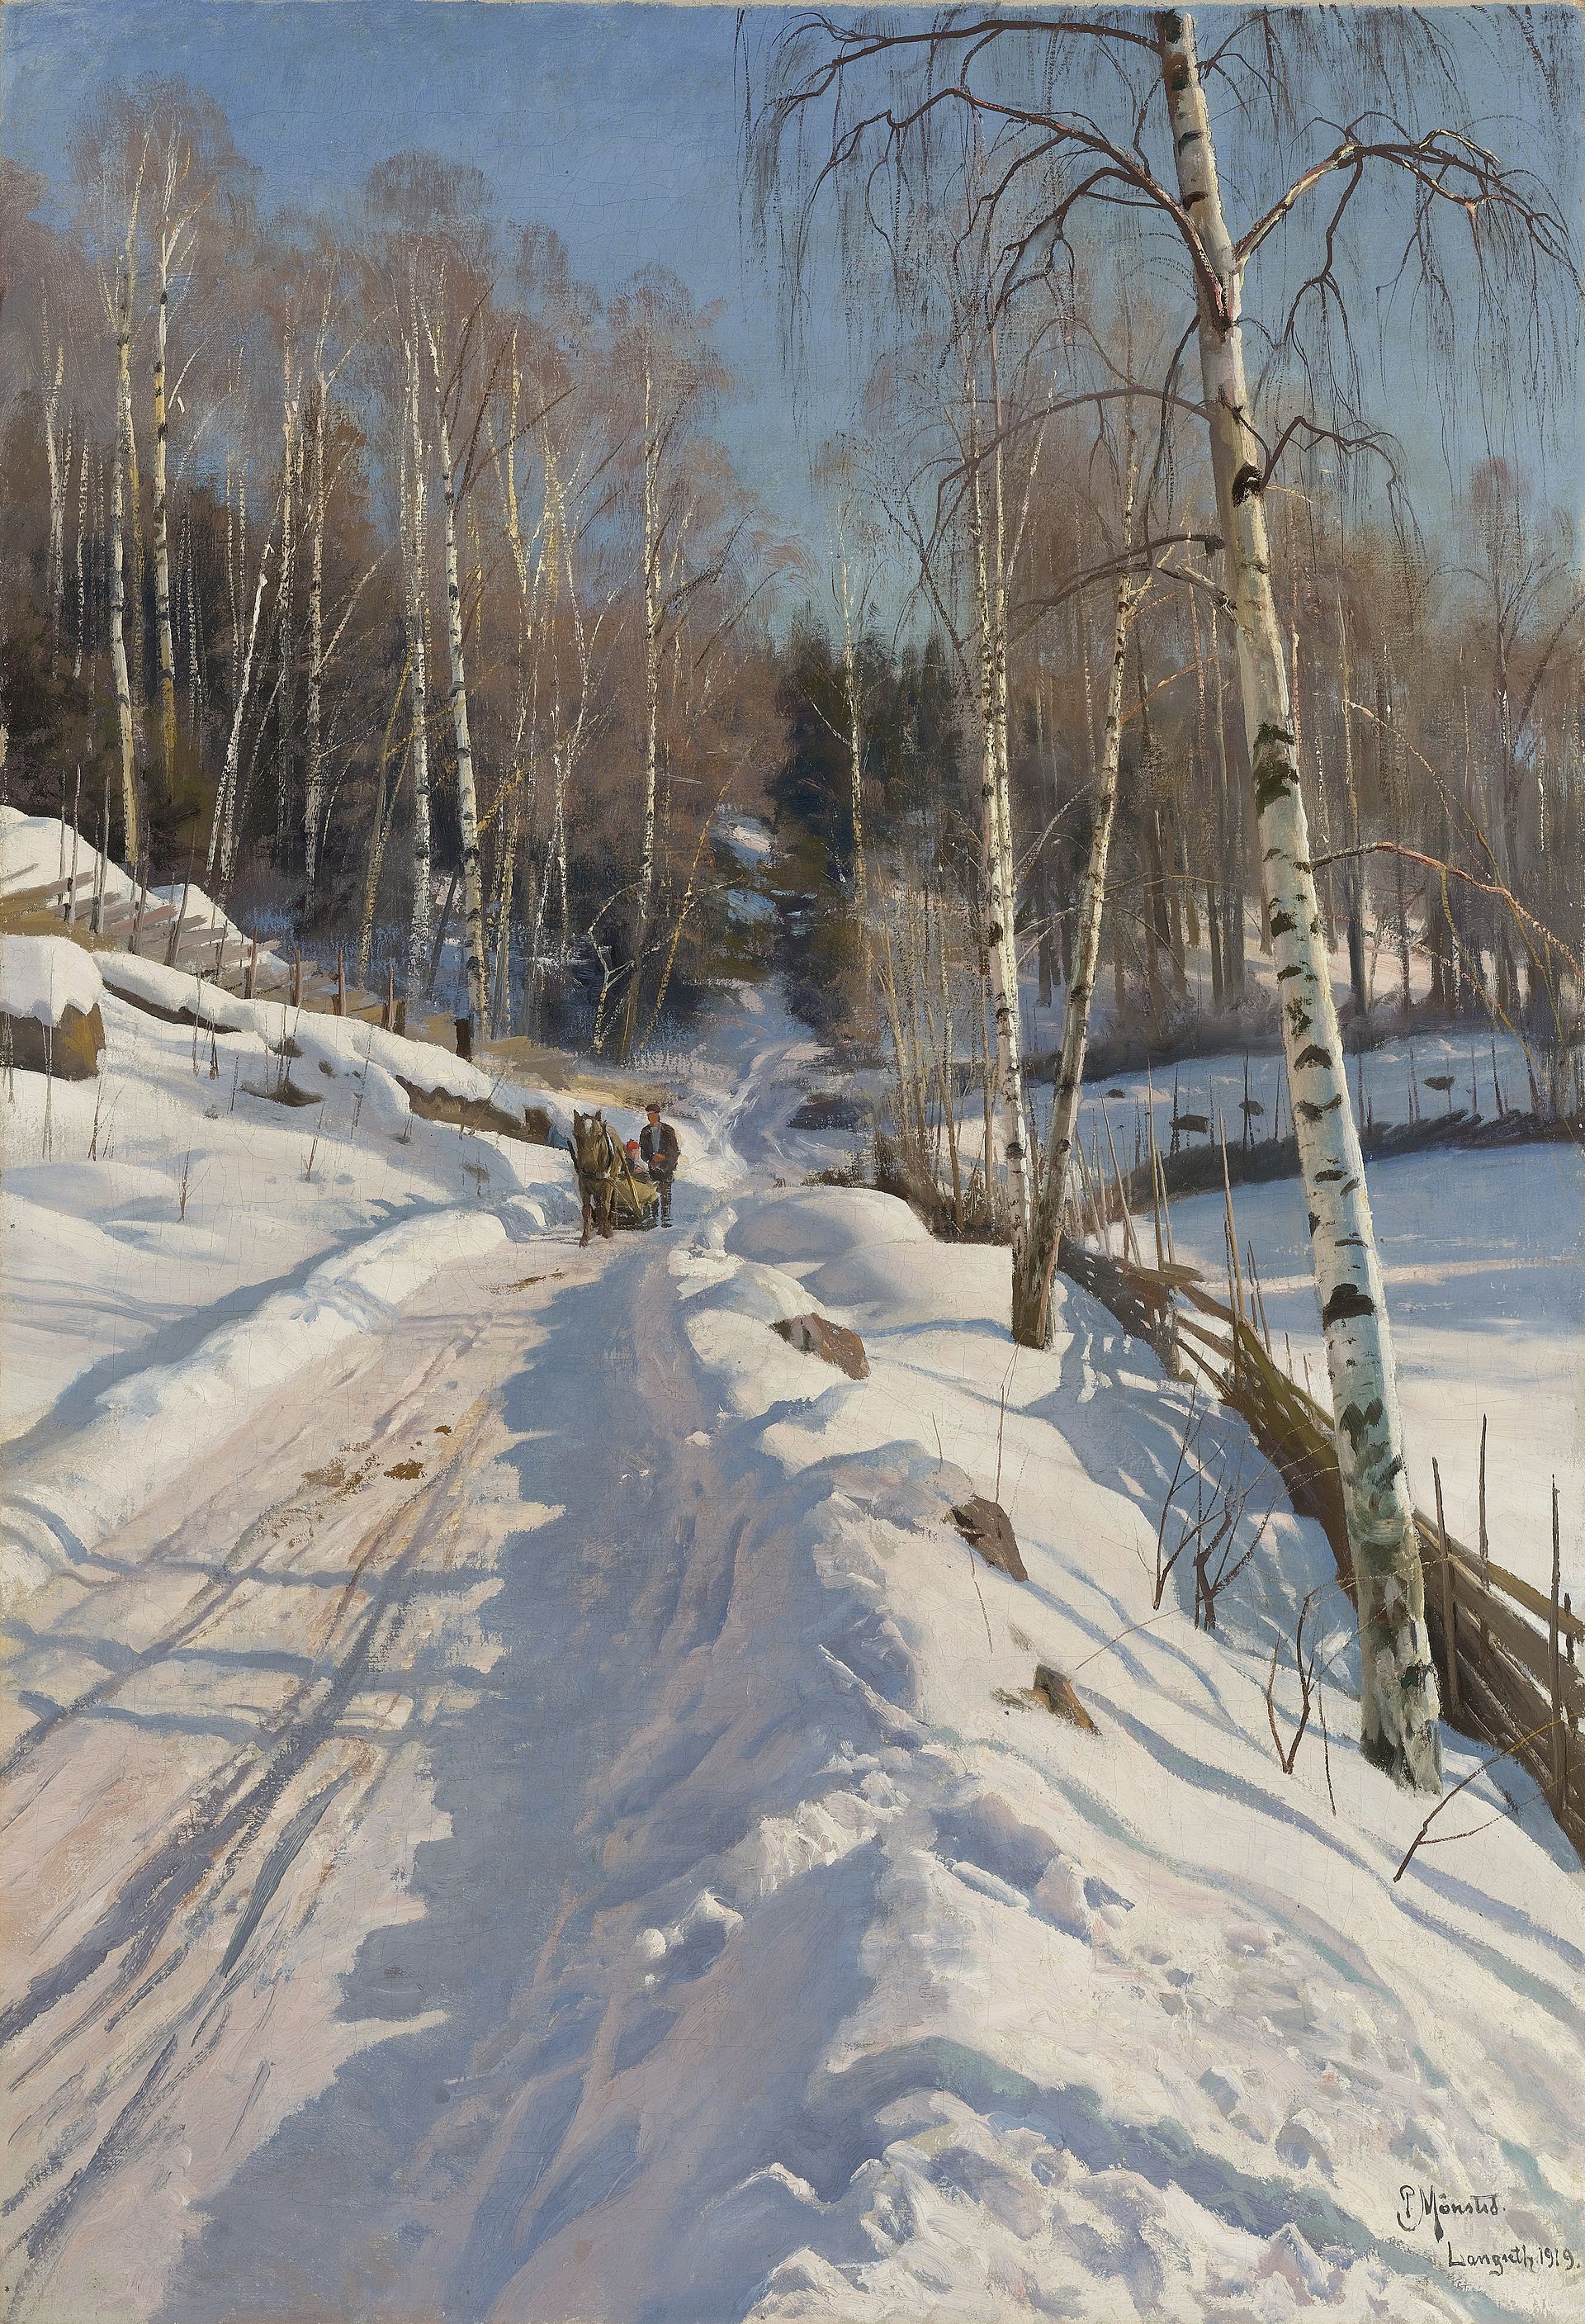 Inspiration: “Sleigh Ride on a Sunny Winter Day,” by Peder Monsted